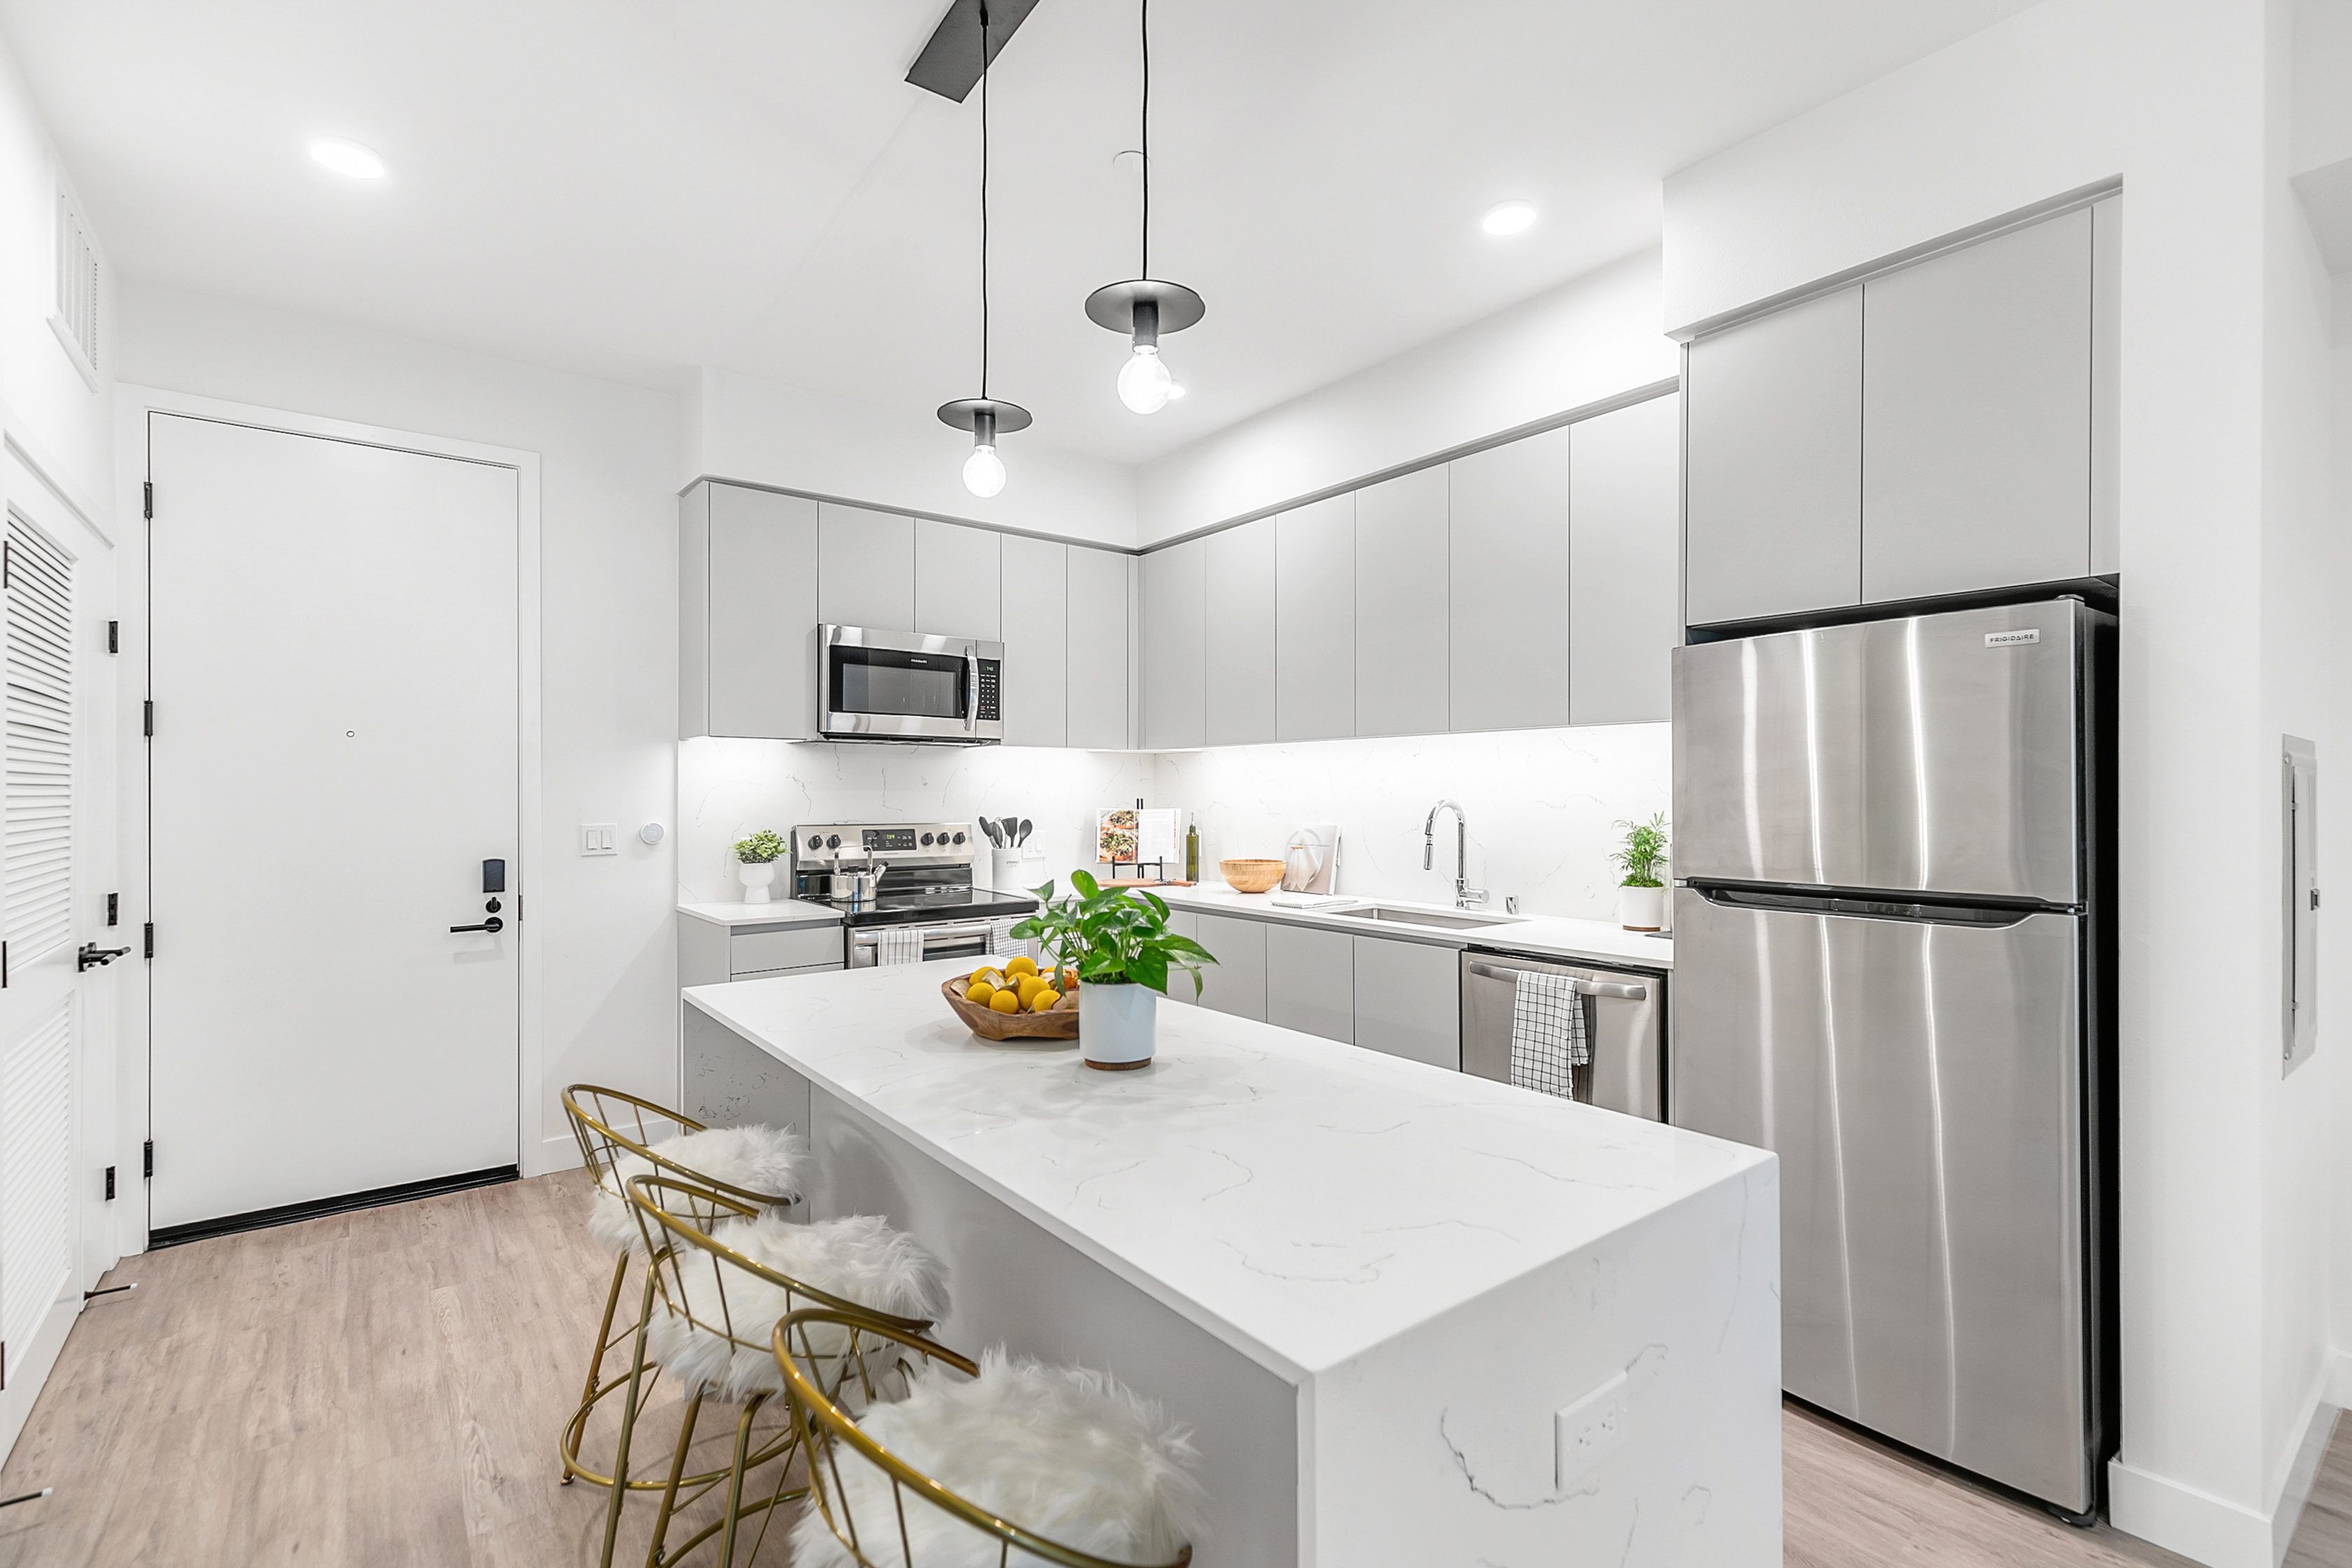 A kitchen in The Rinrose apartment complex in Pasadena with white cabinets and stainless steel appliances.